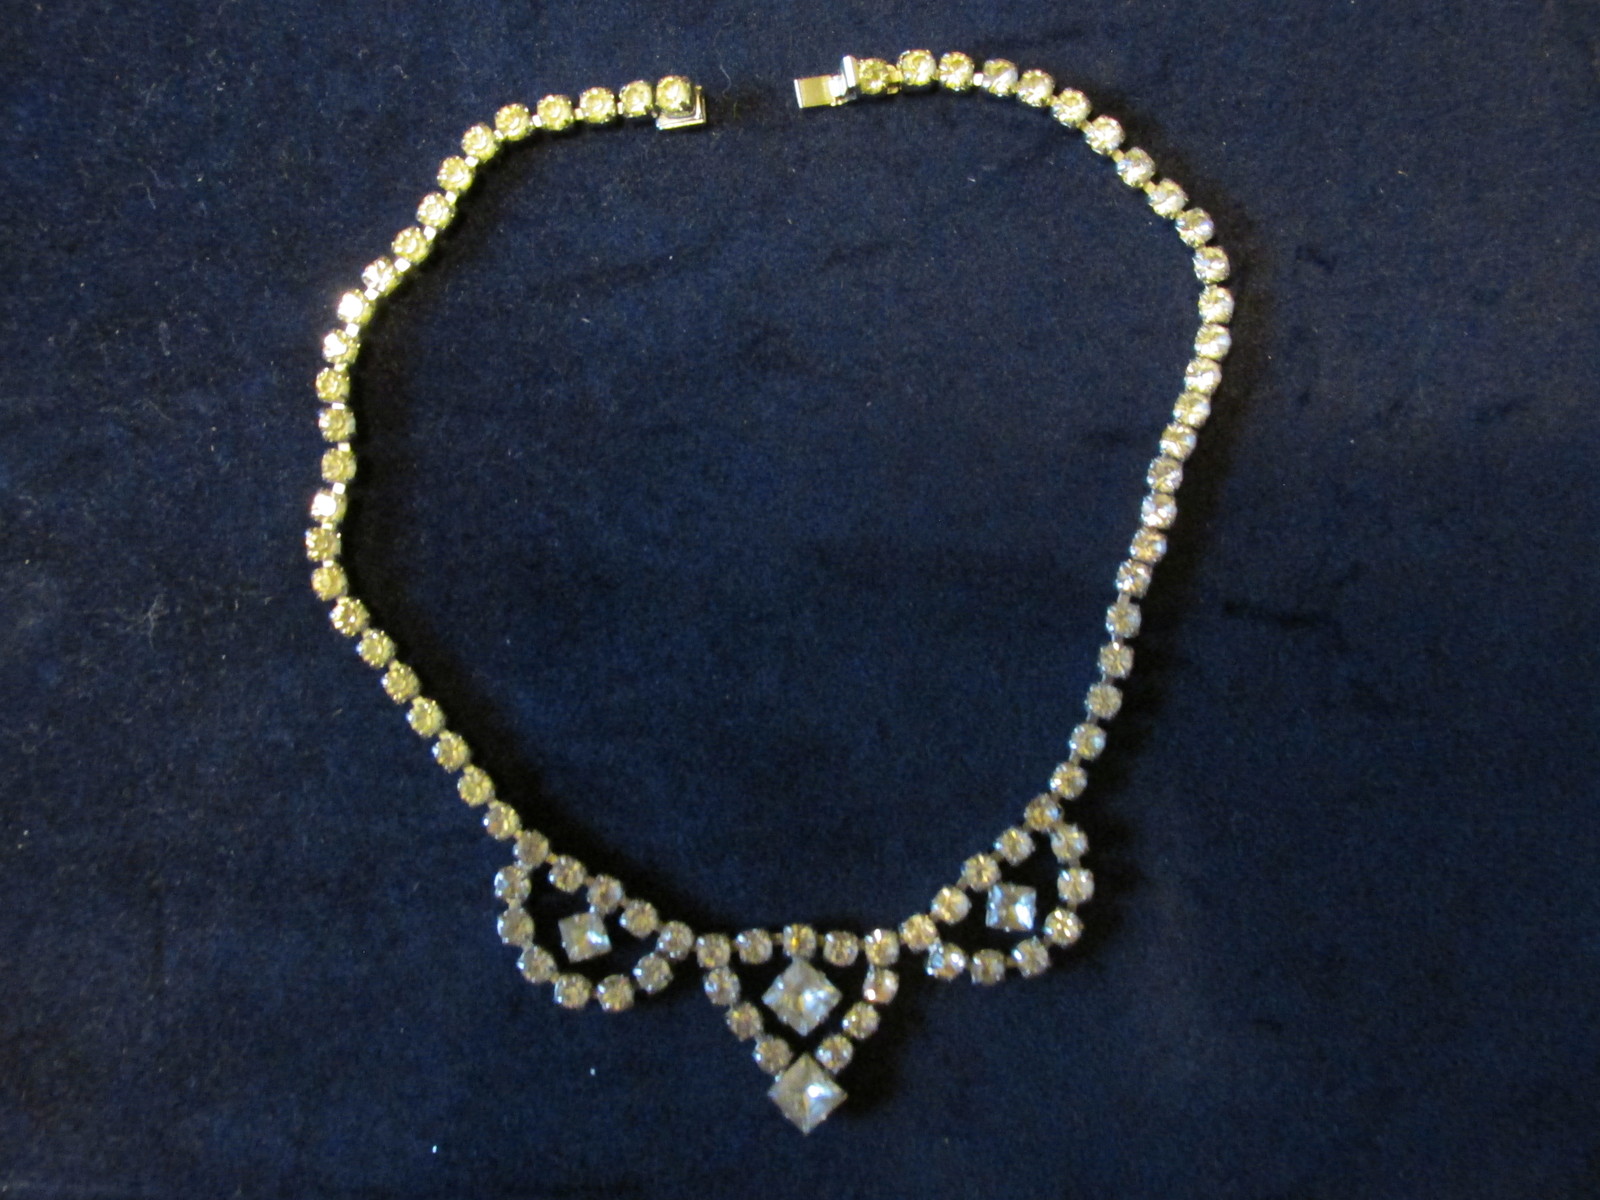 Vintage Clear Prong Set Rhinestone Swag Necklace - 1940s / 1950s ...